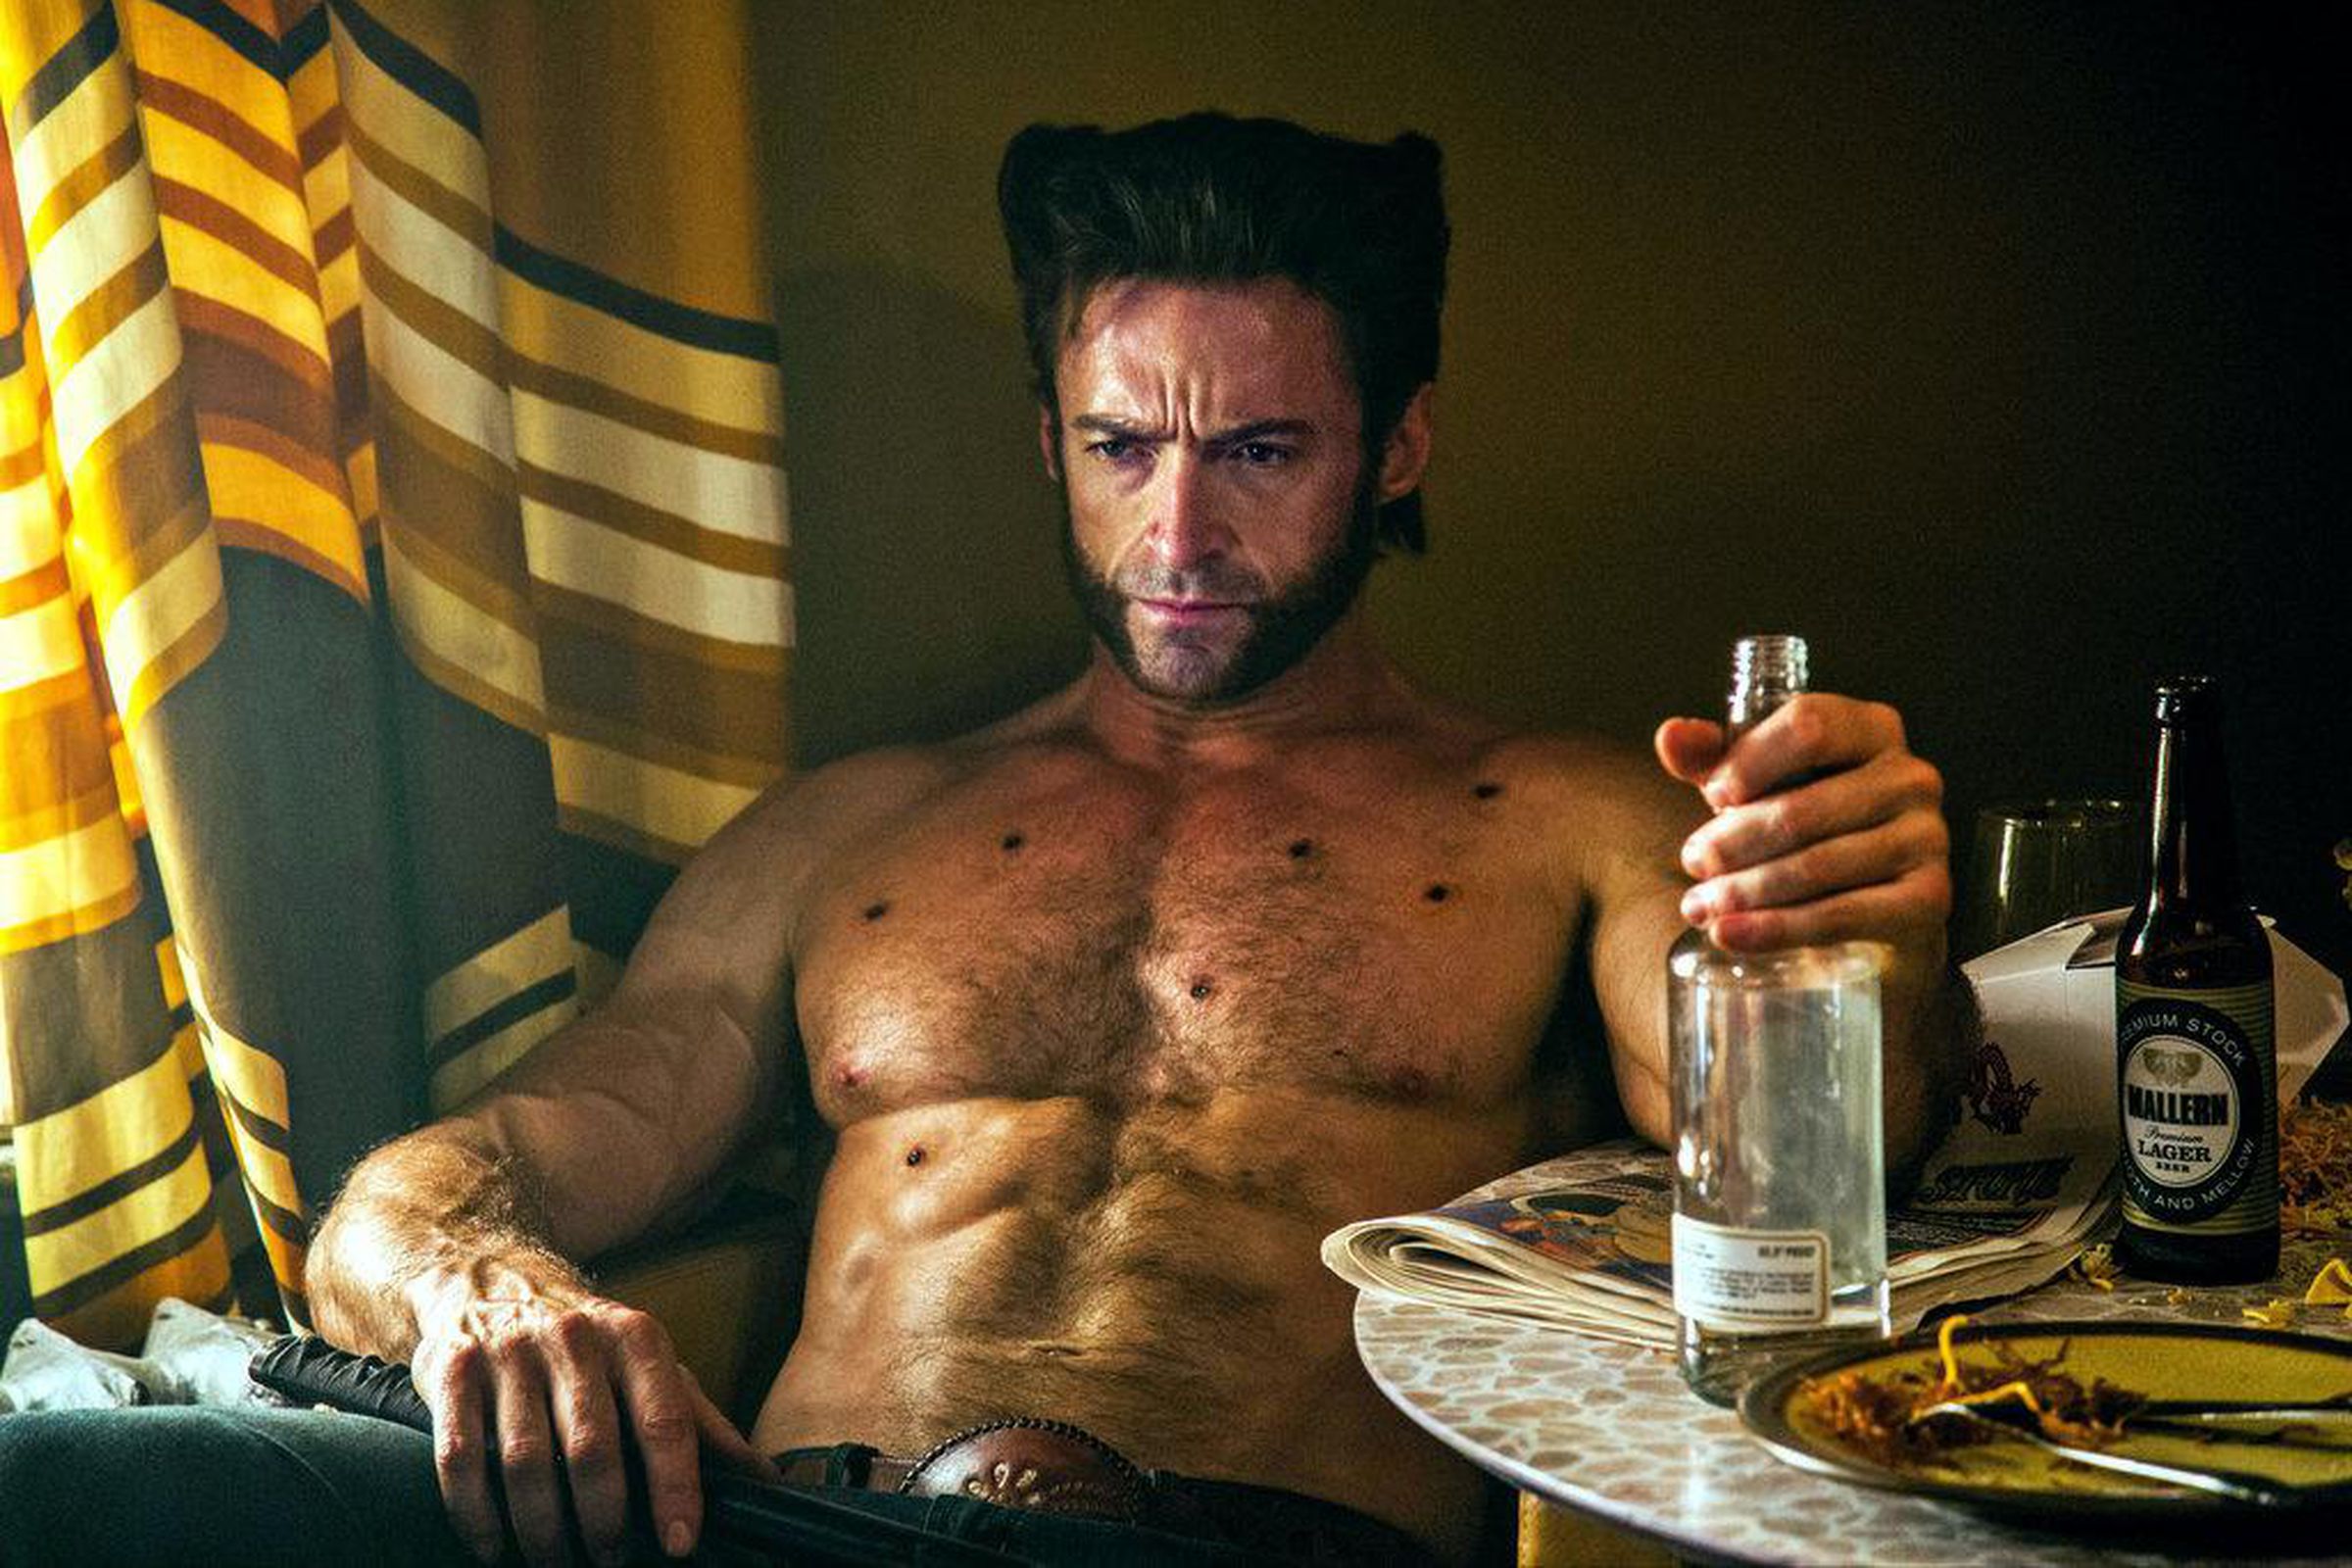 A shirtless man riddled with bullet wounds that are healing very quickly as he sits in a dingy hotel room drinking hard liquor.